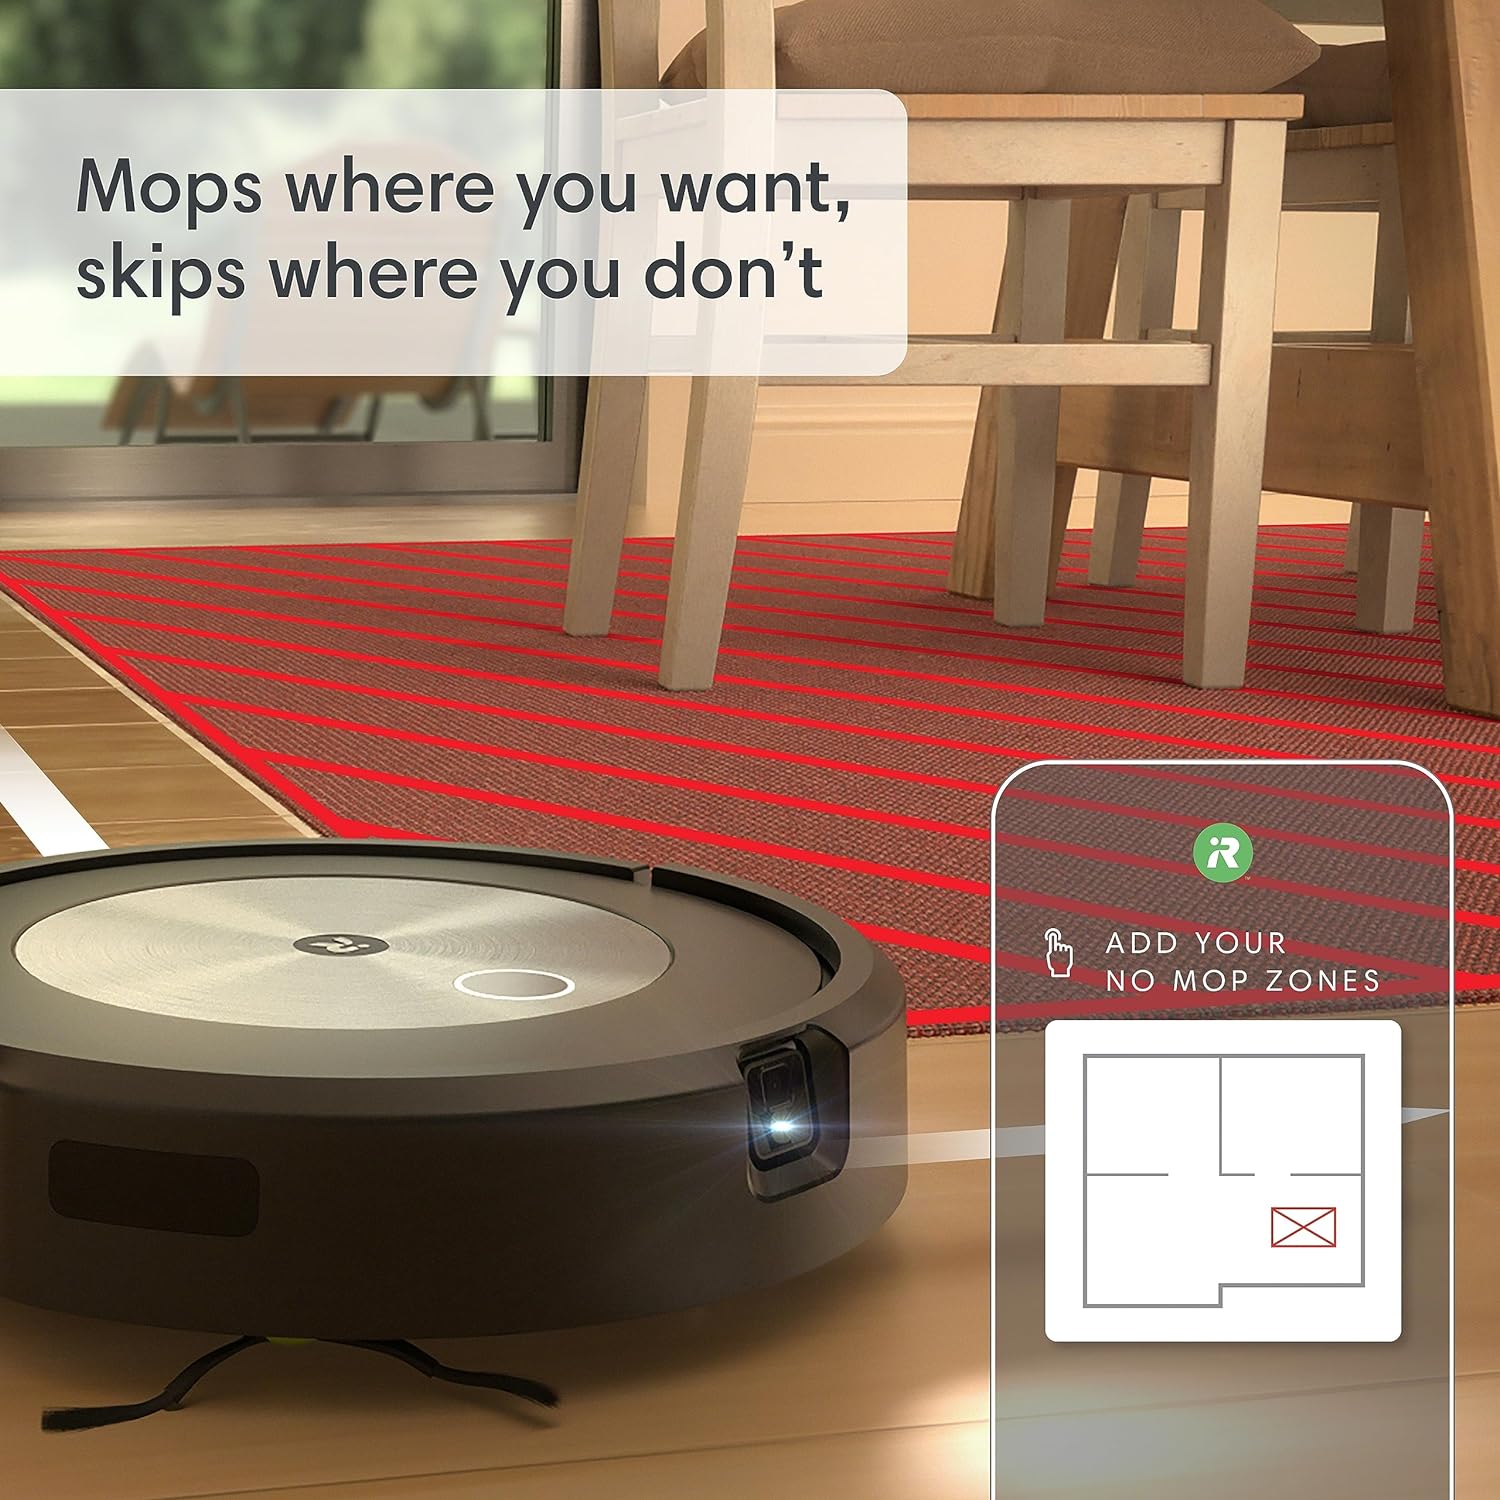 The iRobot Roomba Combo i5+ mops and picks up dirt